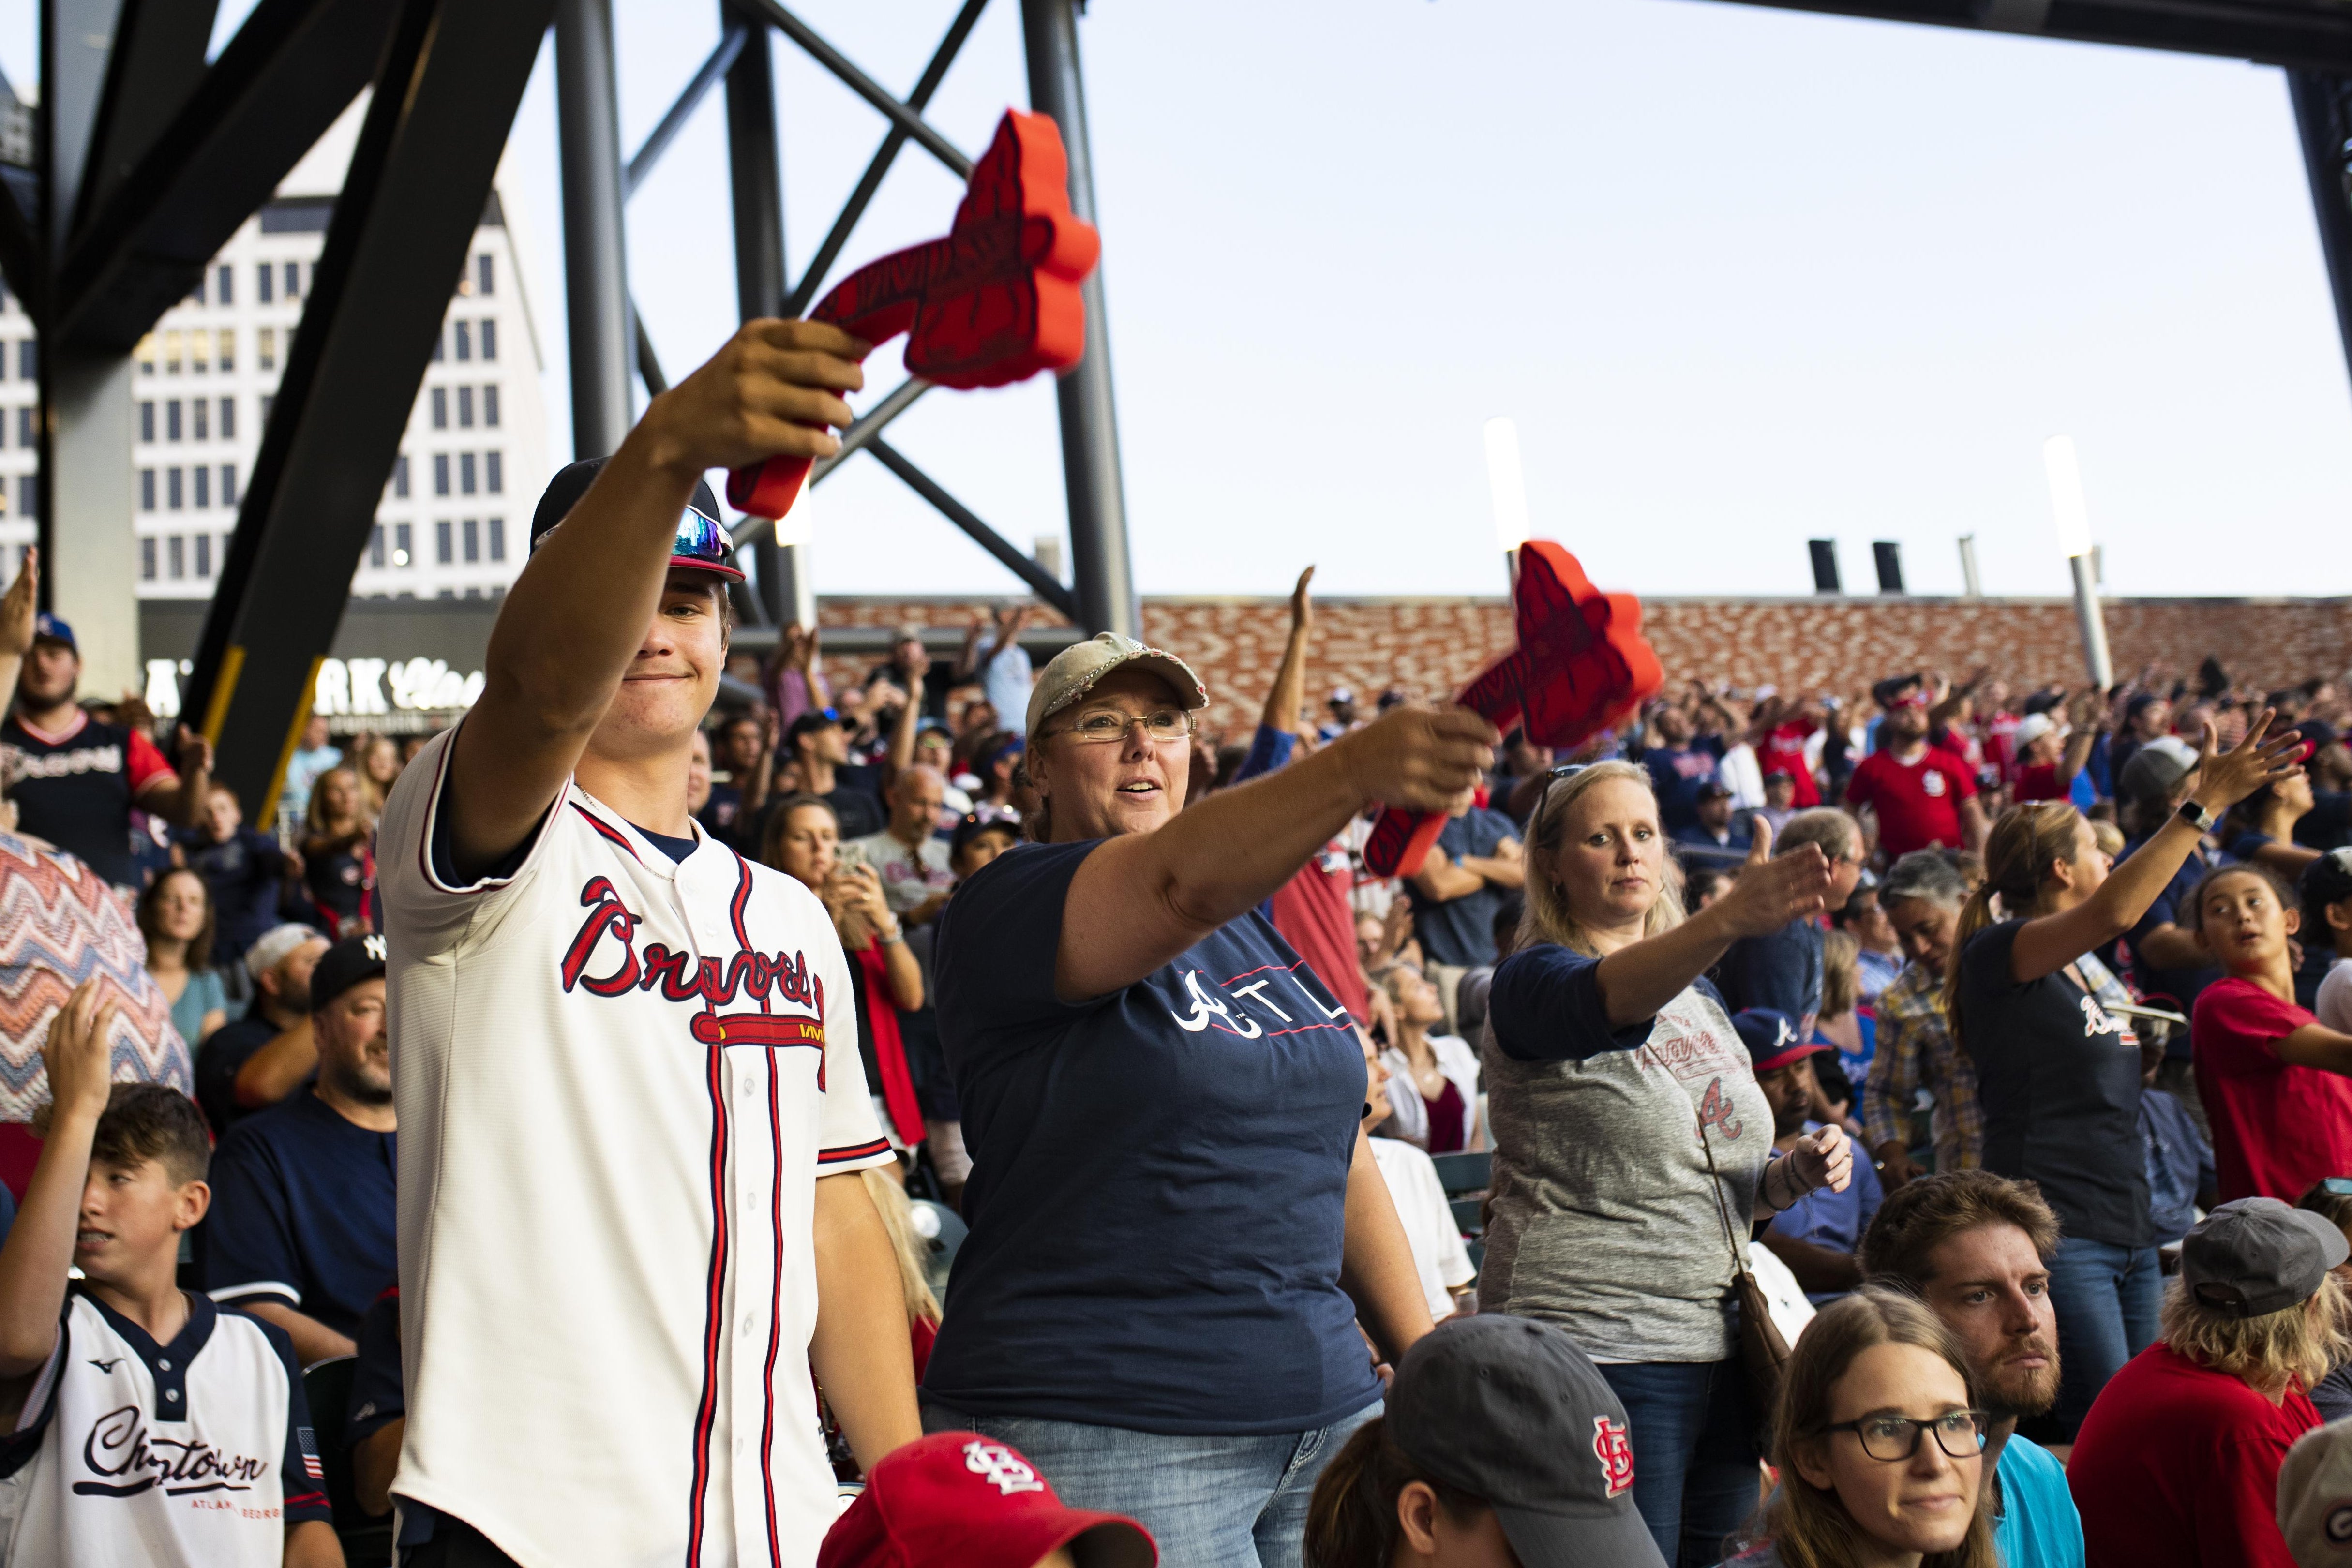 Fans in the stands hold out foam tomahawks or their right arms with hands in a "chop" position.